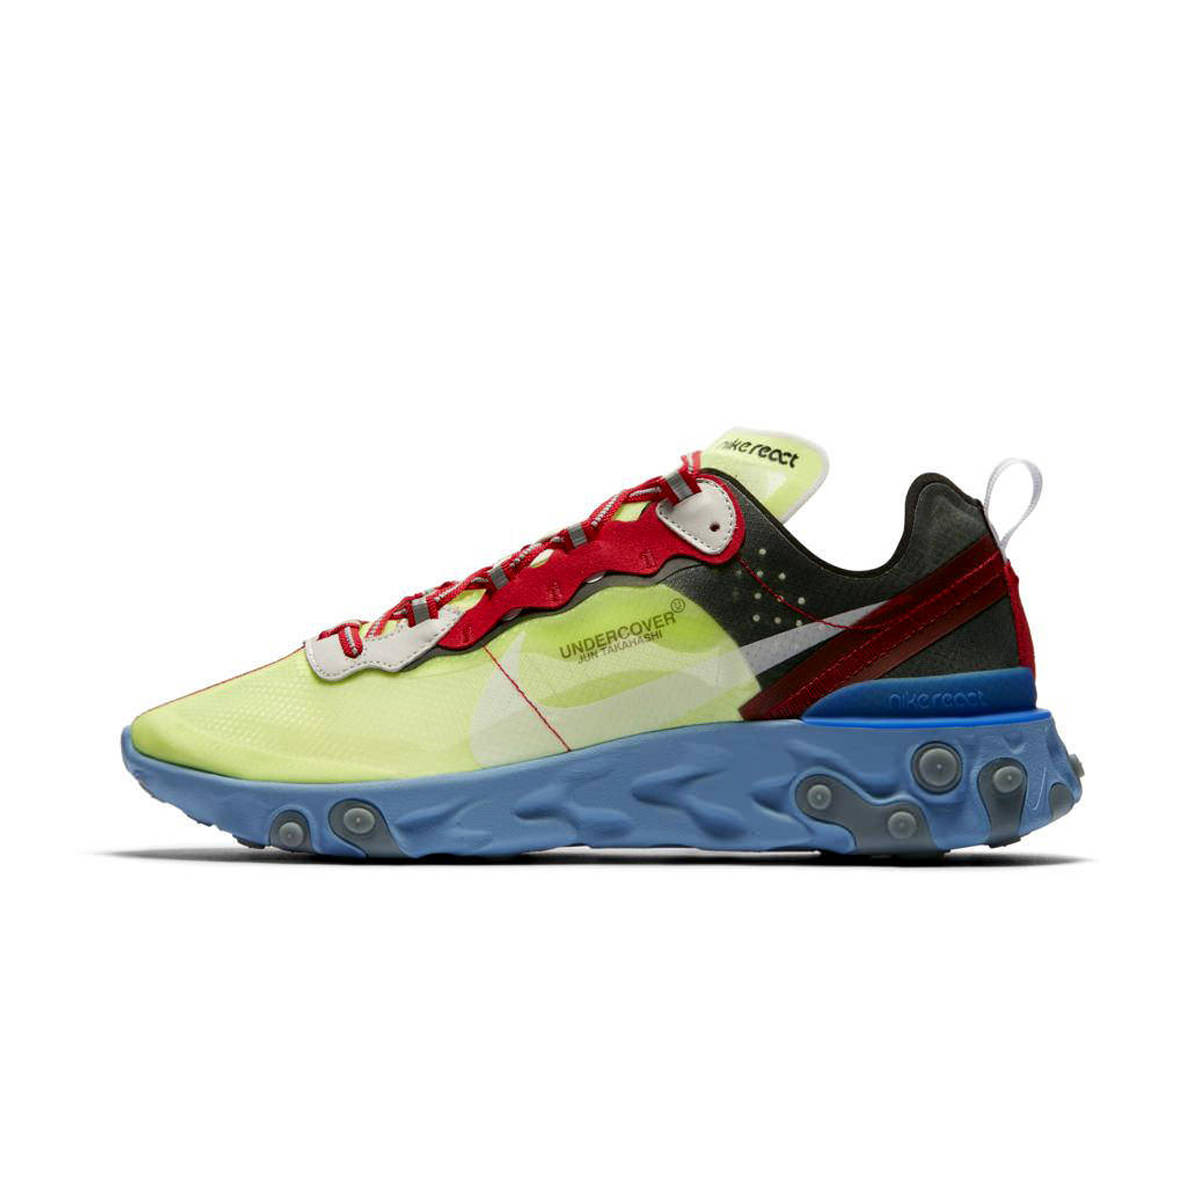 Nike React Element 87 Undercover VoltNike React Element 87 Undercover ...